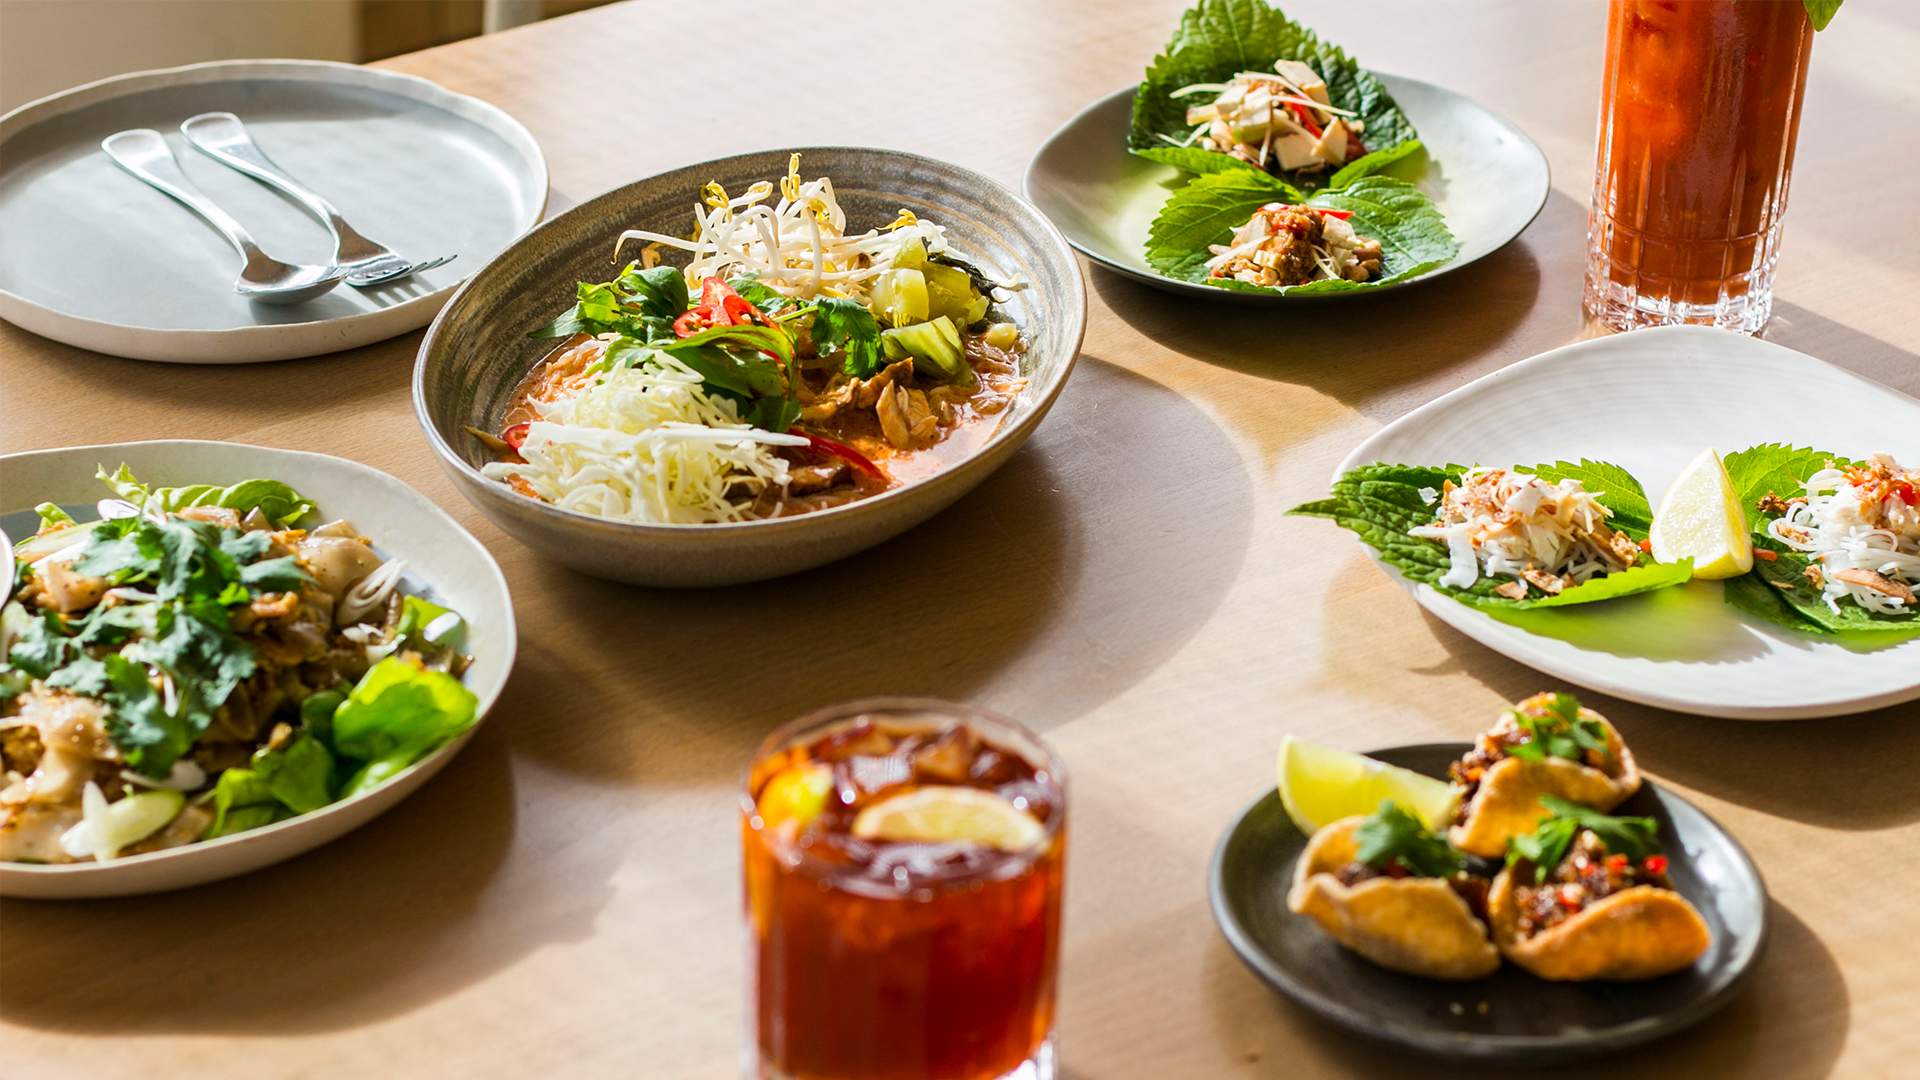 Find Fried Chicken and Thai Bloody Marys on Saan's New Brunch Menu